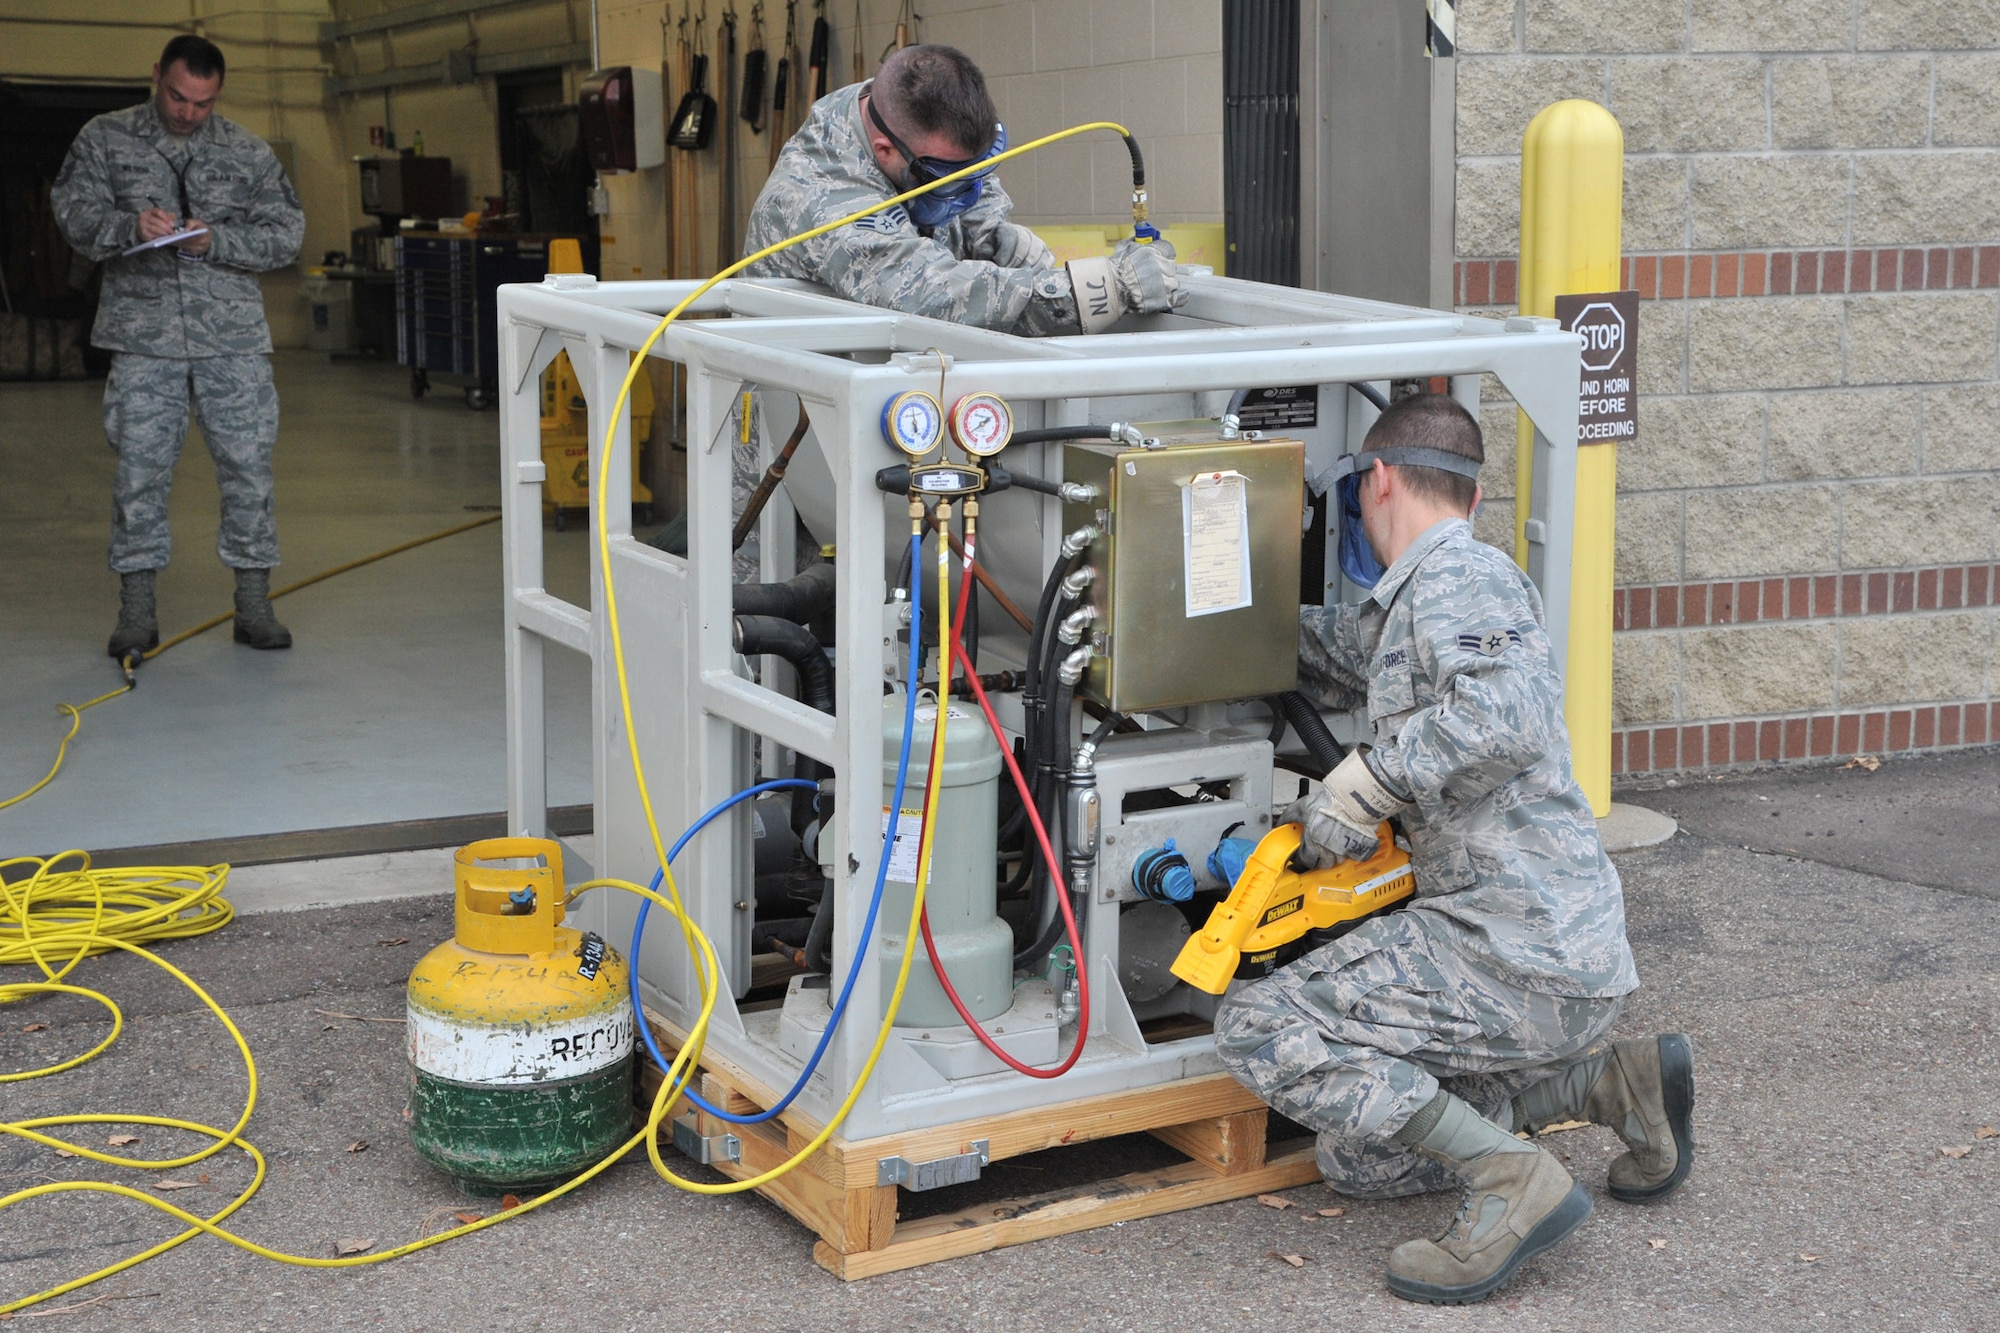 Two Airmen from the 341st Maintenance Operations Squadron Power, Refrigeration and Electrical Section, follow a technical order to complete a task as a member of the Air Force Global Strike Command Inspector General team evaluates them in the background Nov. 14. The 341st Missile Wing was awarded an overall “Excellent” rating following a weeklong Nuclear Operational Readiness Inspection Nov. 12 to 18. (U.S. Air Force photo/John Turner)